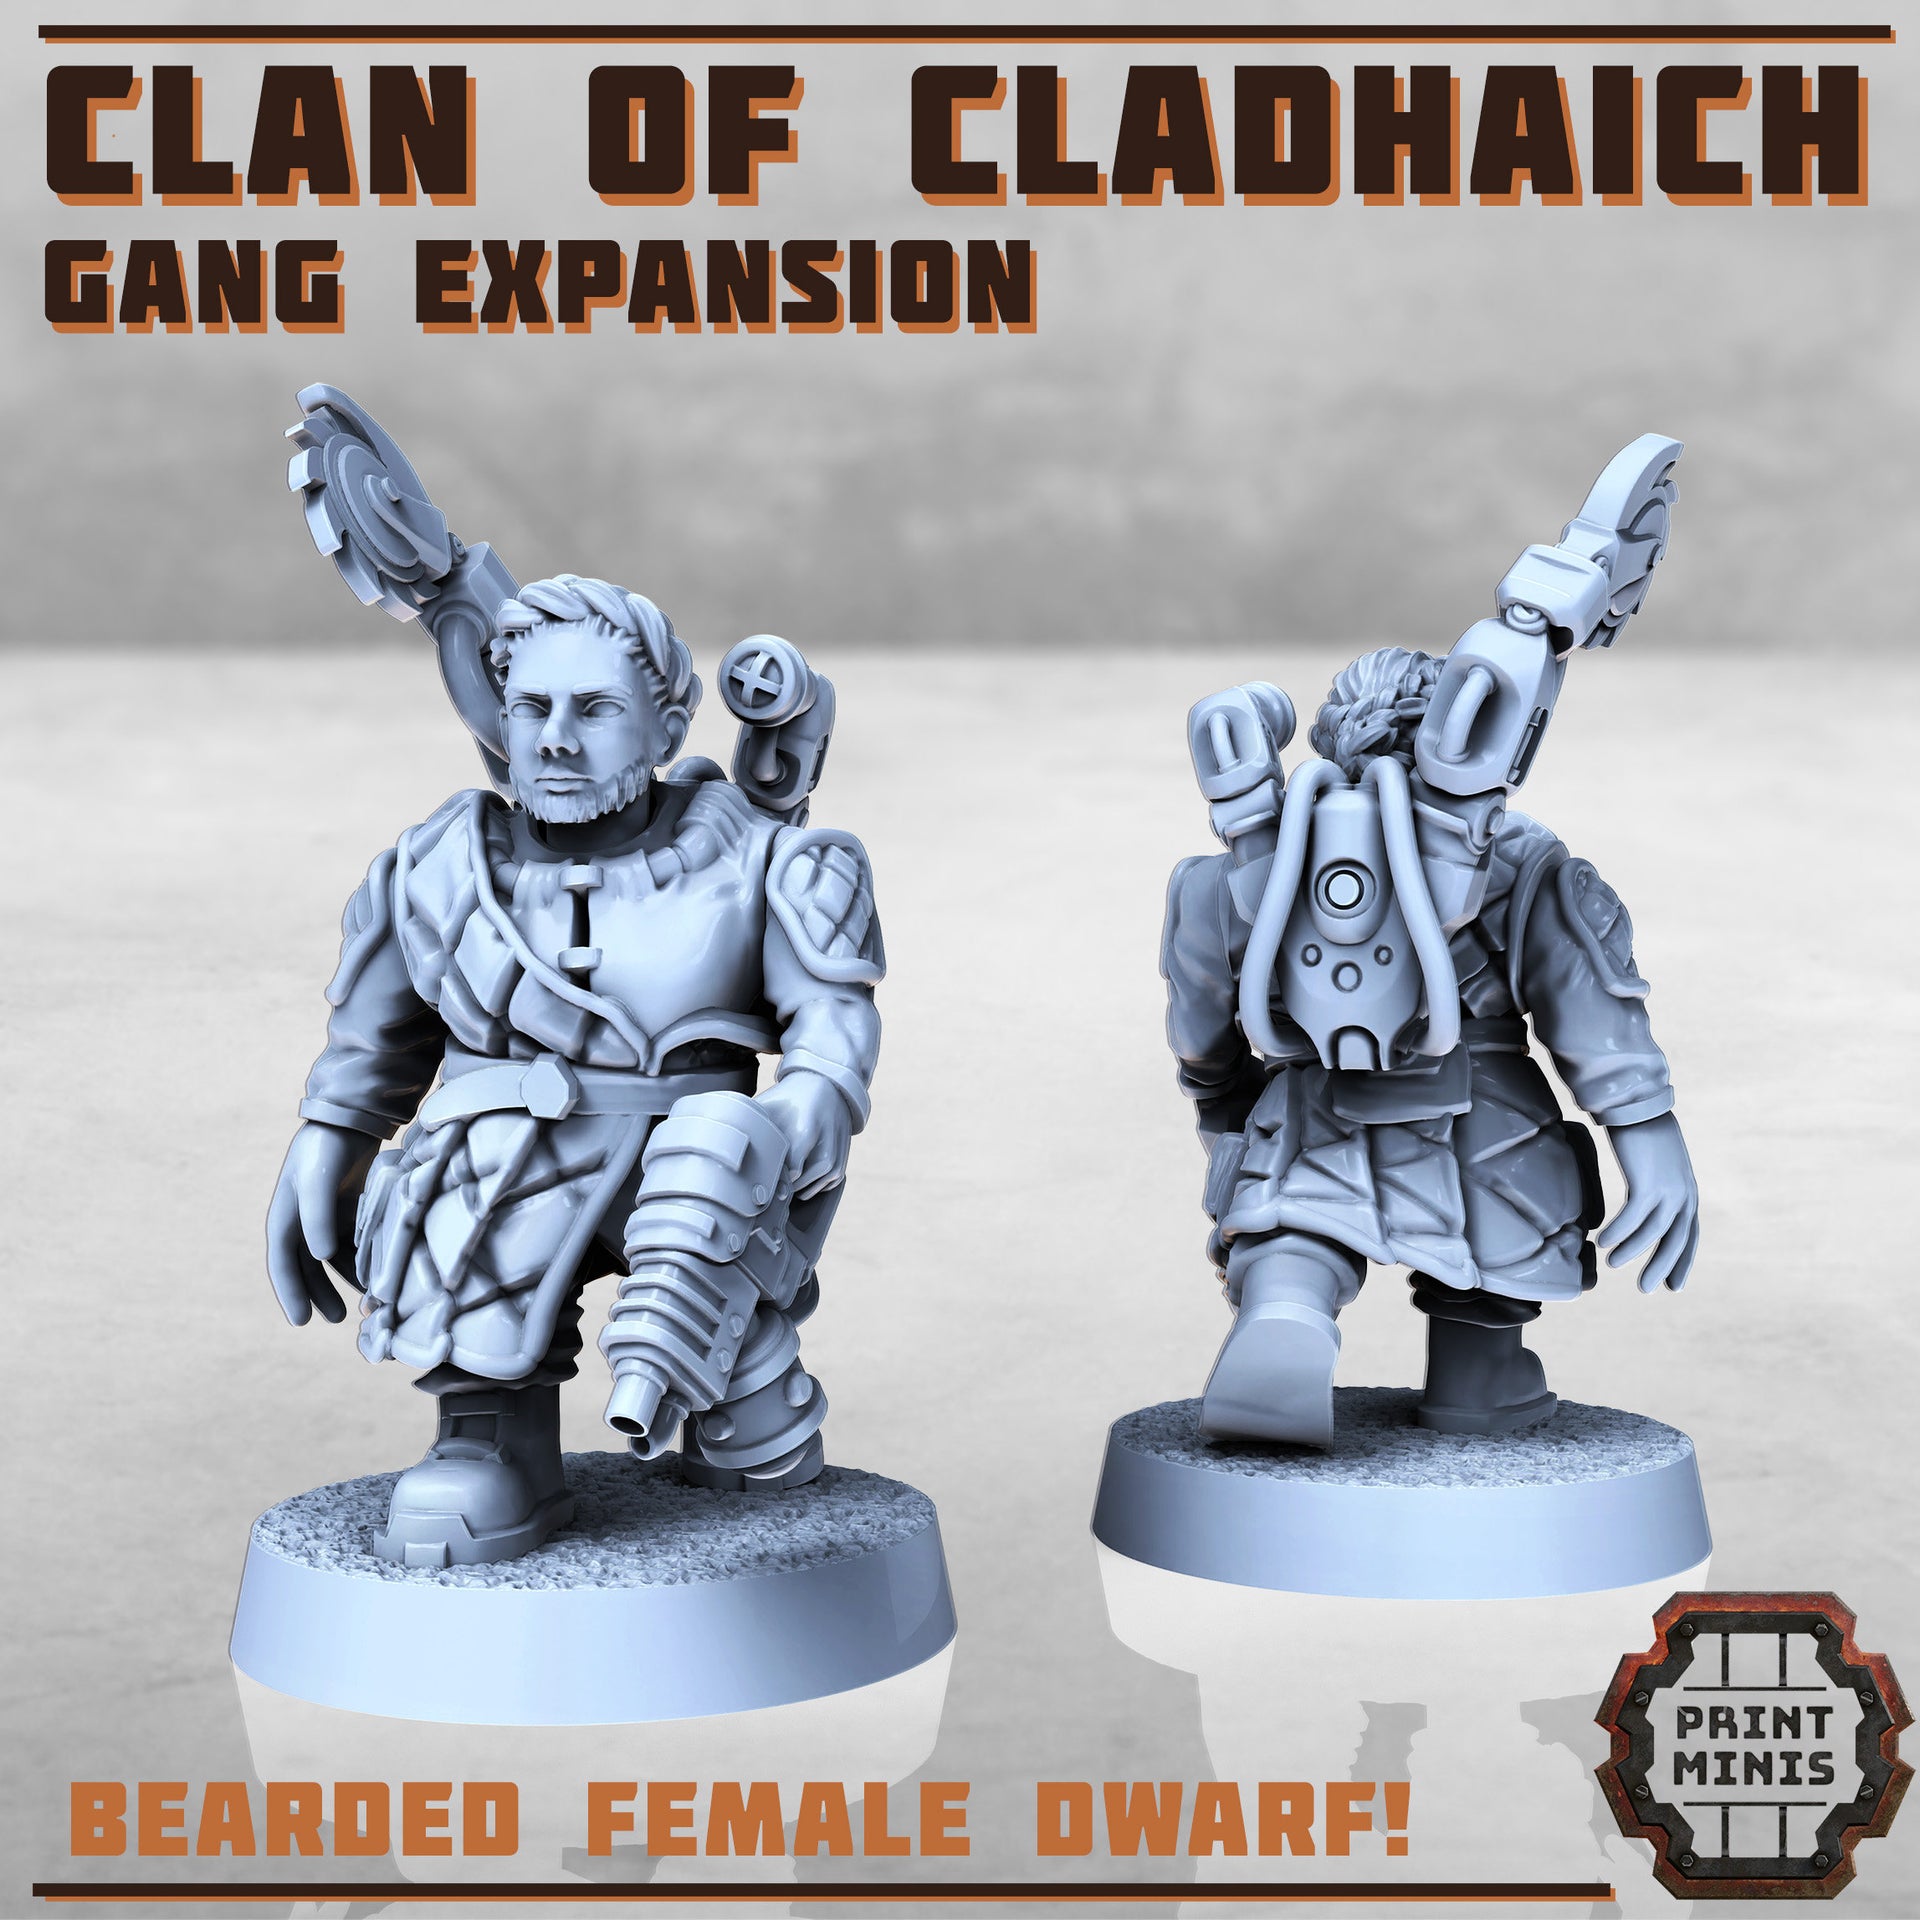 Space Dwarve Gang Expansion, Clan of Cladhaich - Print Minis | Sci Fi | Light Infantry | 28mm Heroic | Apocalypse | Miners | Heavy Weapons